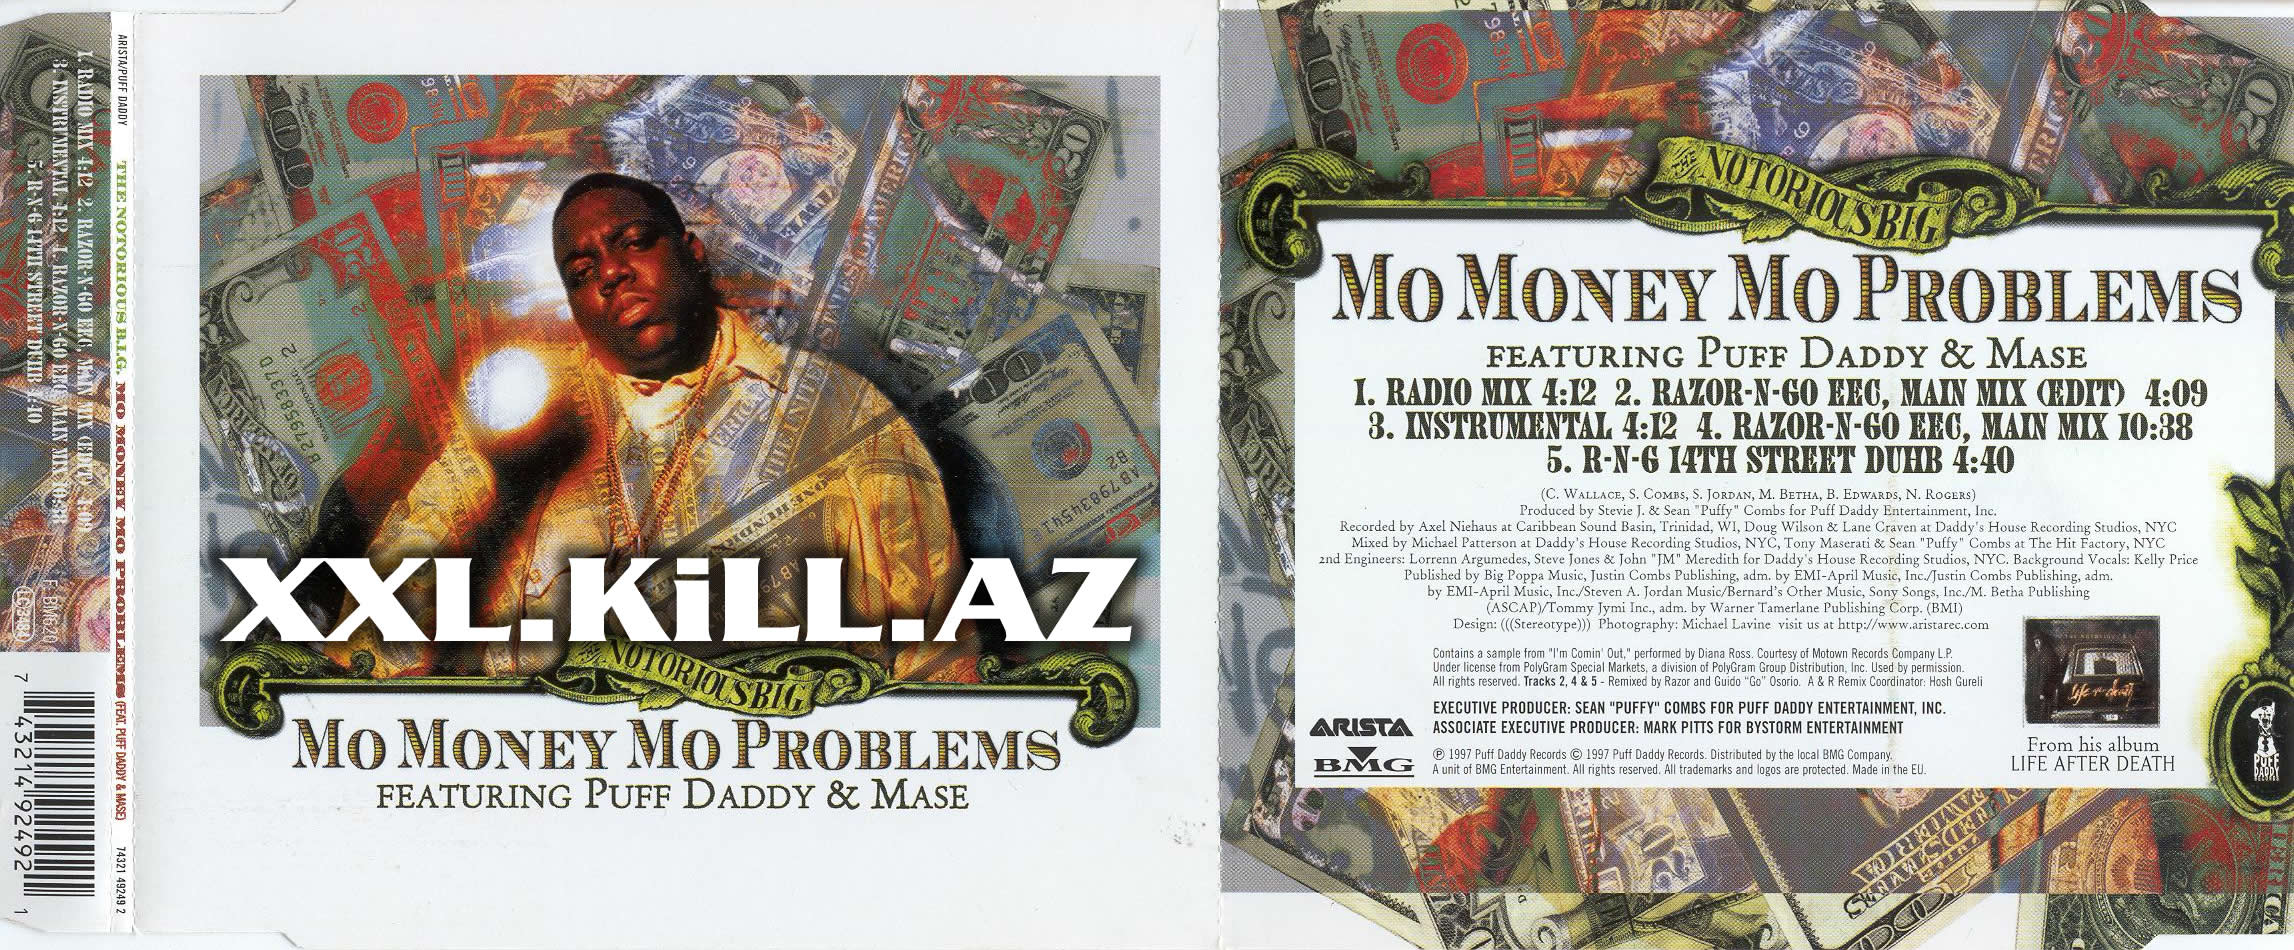 Art for Mo Money Mo Problems by Notorious B.I.G. feat. Mase & Puff Daddy